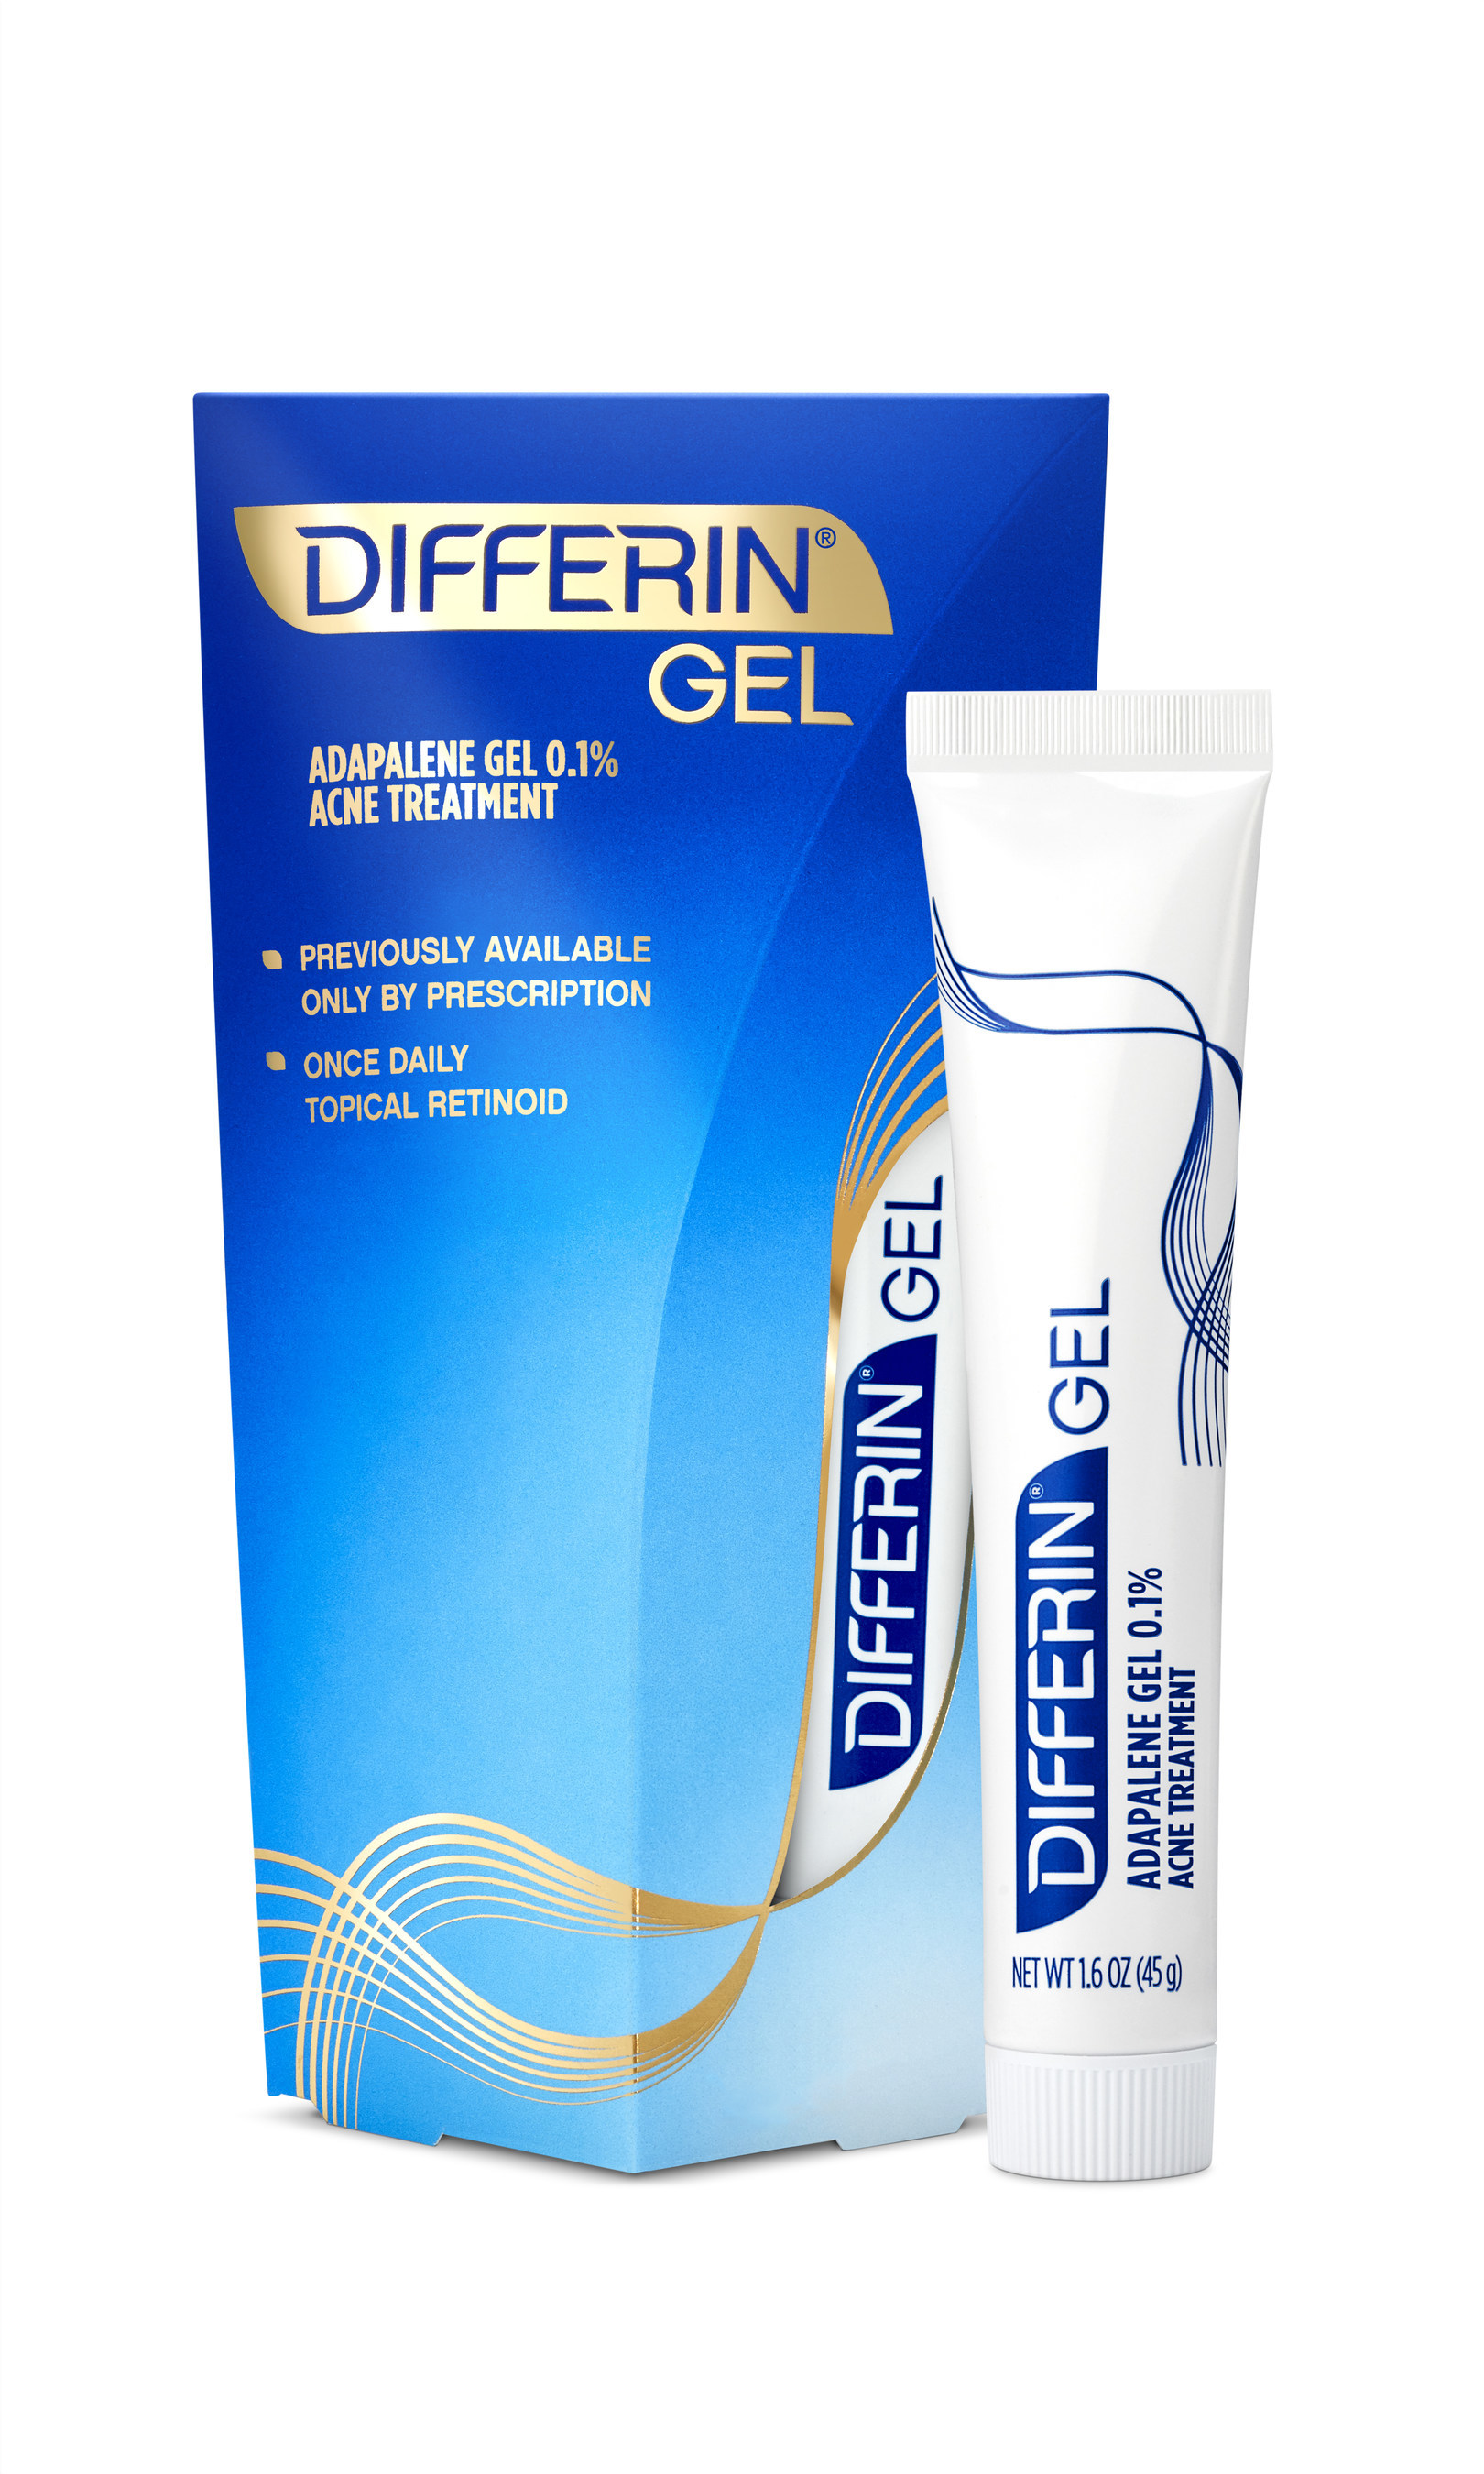 Differin® Gel Acne Treatment Partners with Actress Ashley Benson to End